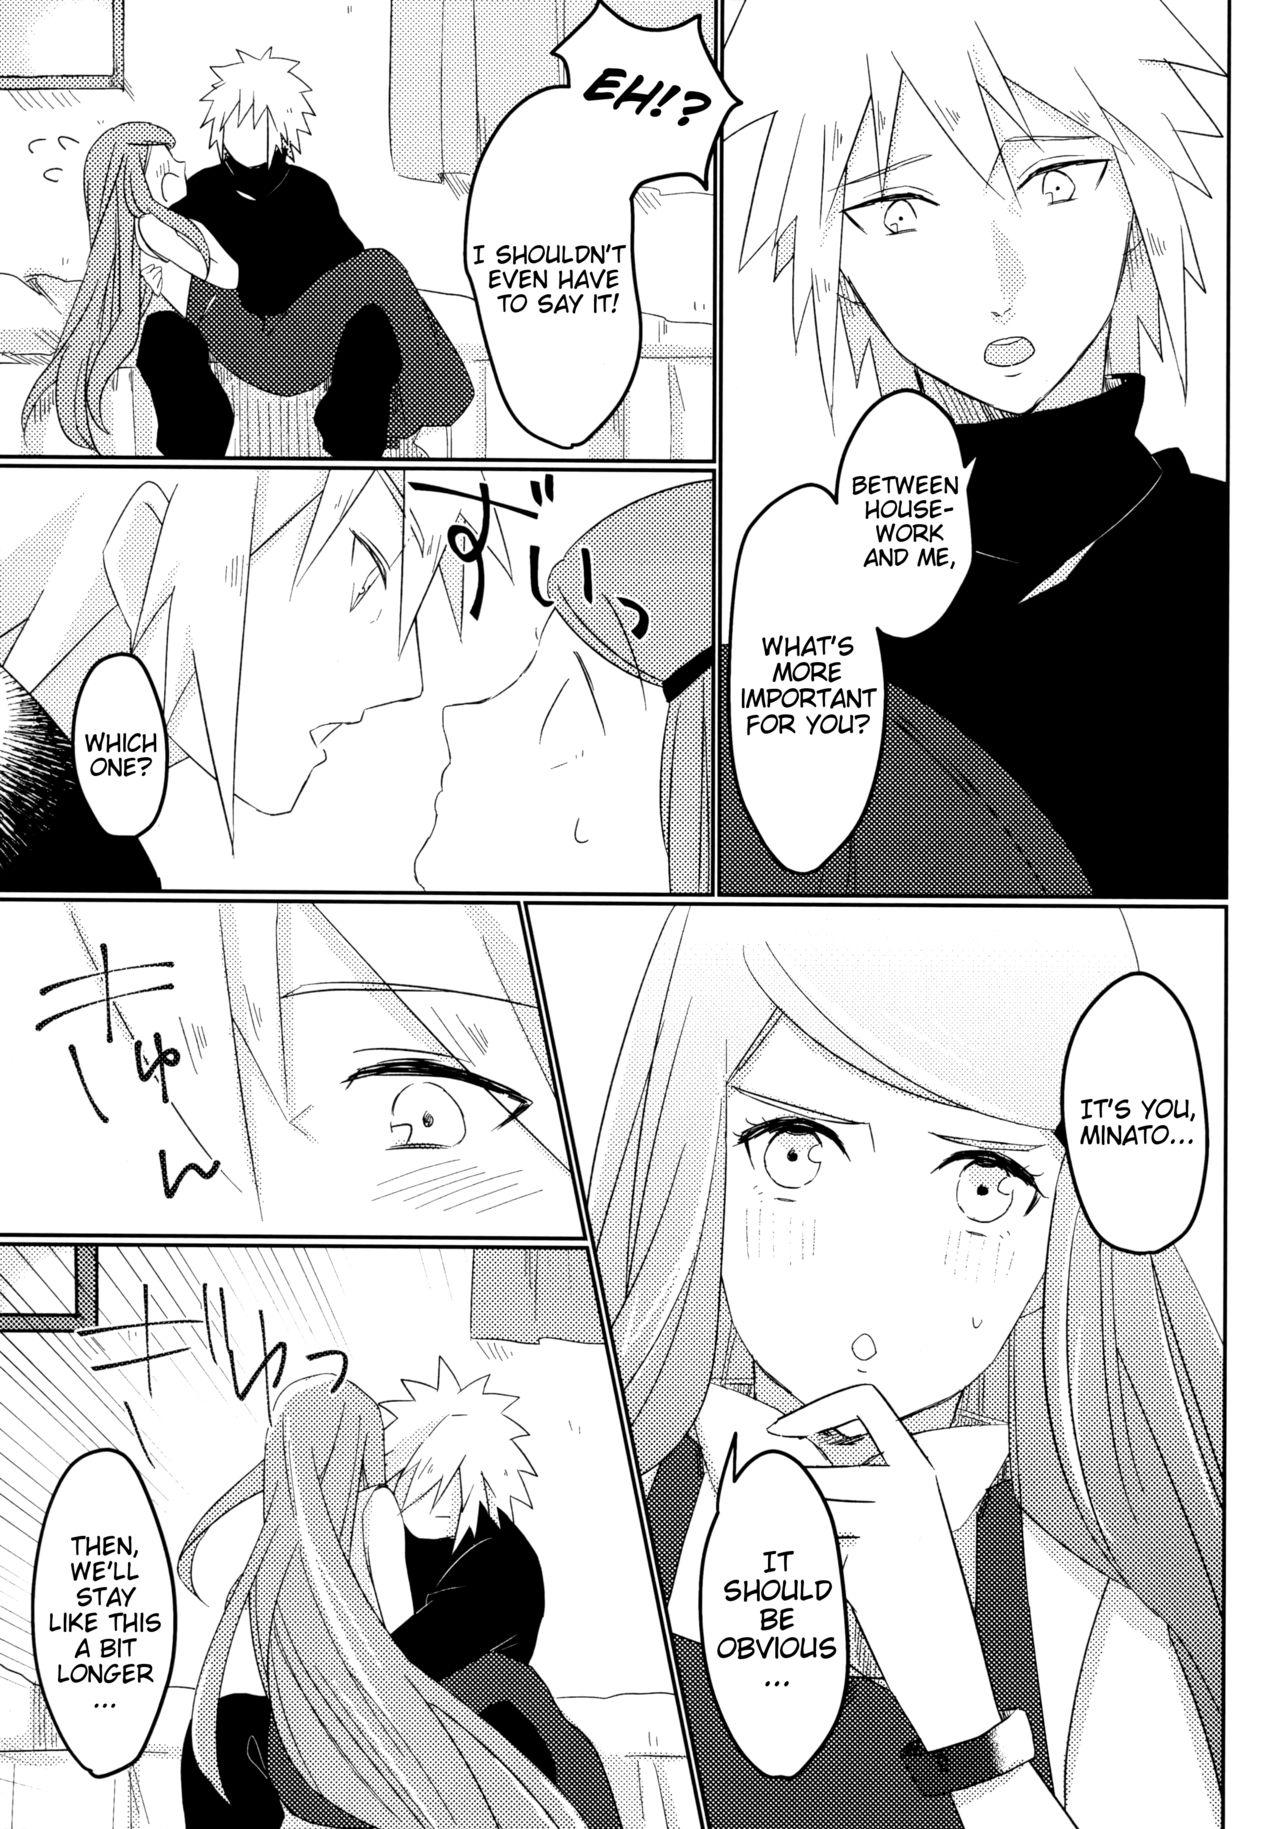 Tittyfuck Only You Know - Naruto Pale - Page 6